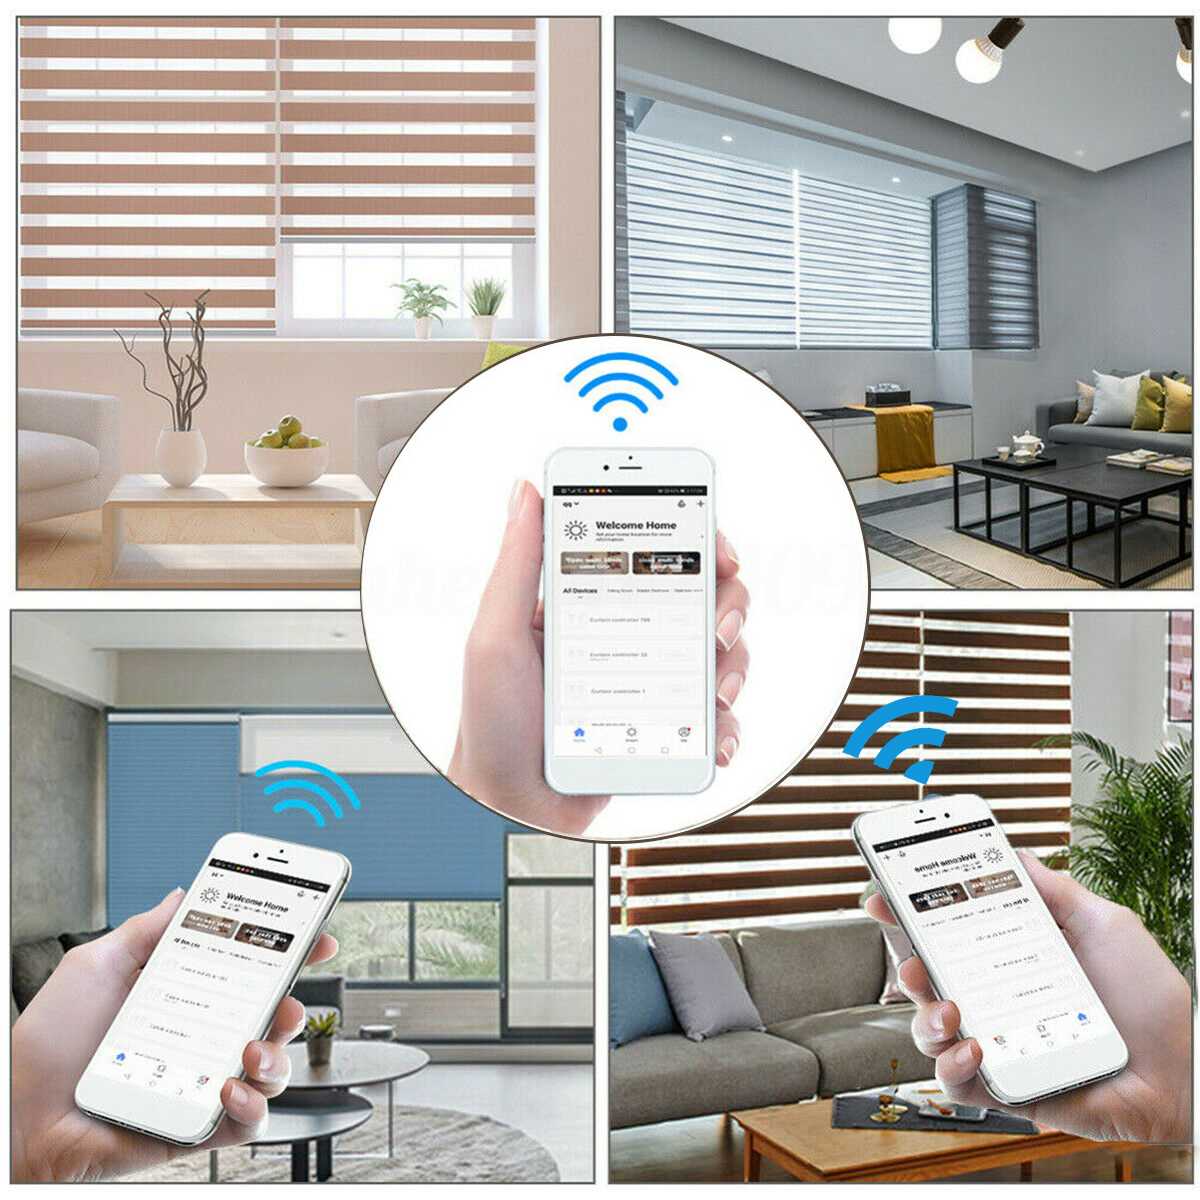 NEW Smart DIY Motorized Chain Roller Blinds Shade Shutter Drive Motor Powered By Solar Panel and Charger bluetooth APP Control